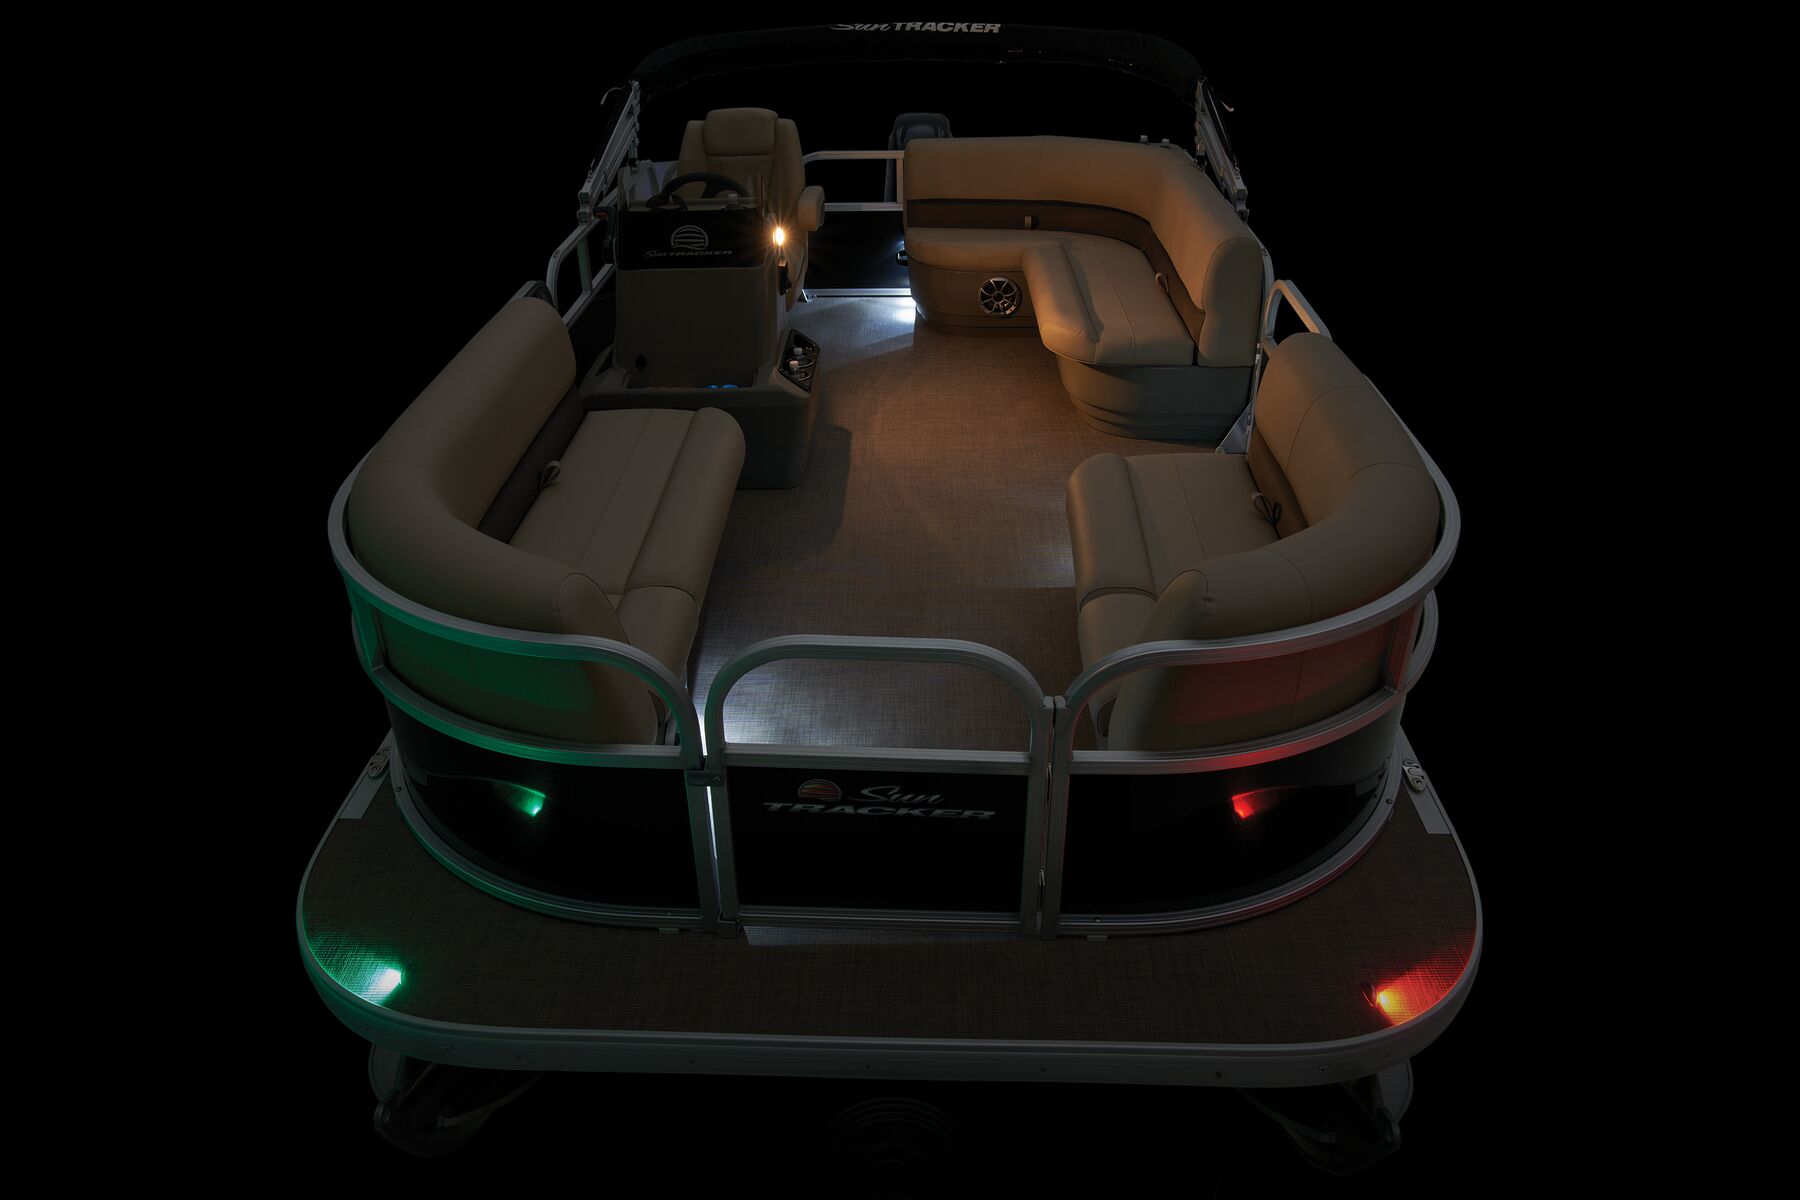 Outboard pontoon boat - BASS BUGGY® 16 DLX - Sun Tracker - sport-fishing /  7-person max.